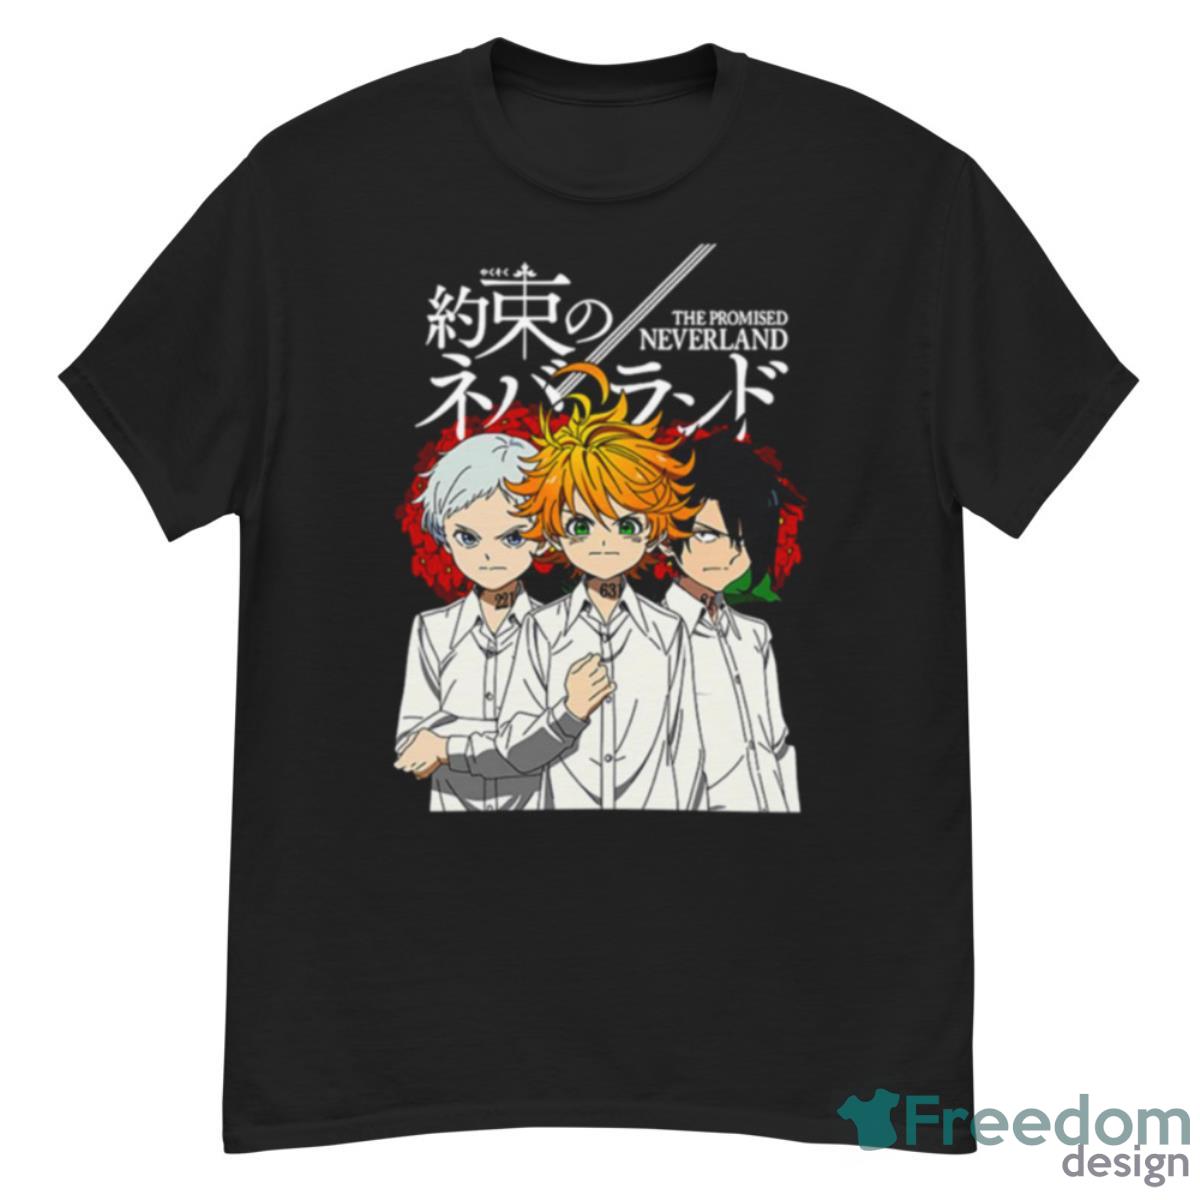 The Brightest Kids The Promised Neverland shirt - G500 Men’s Classic T-Shirt